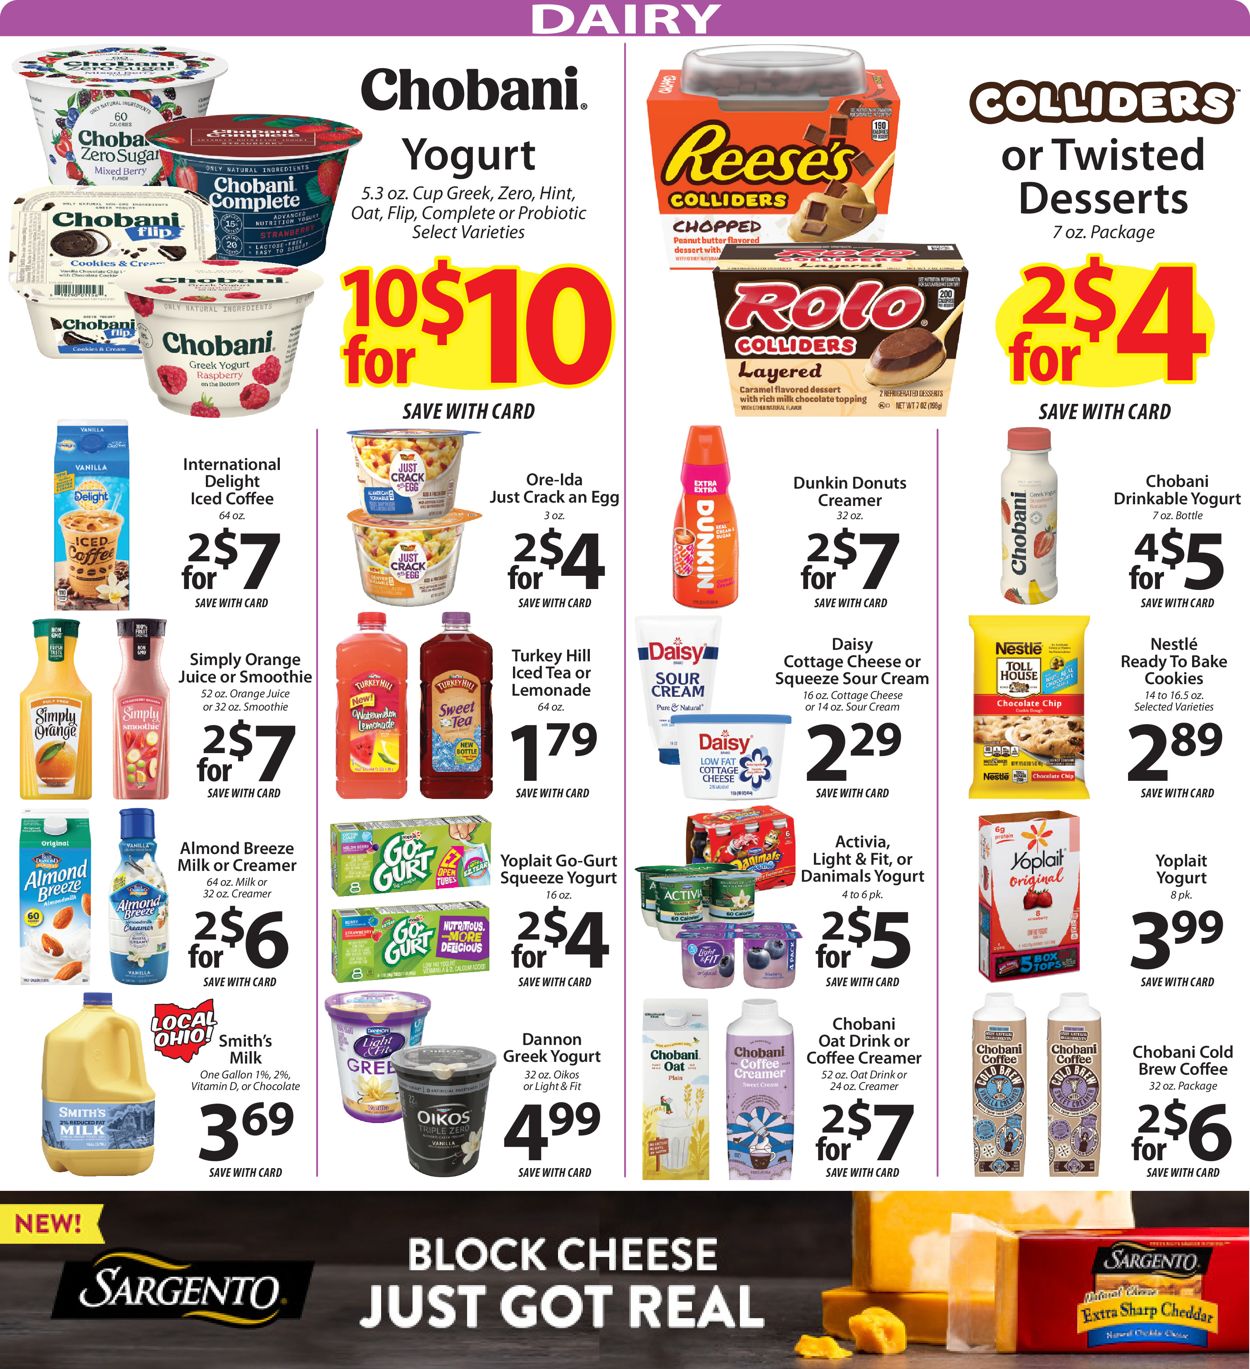 Acme Fresh Market Ad from 02/10/2022